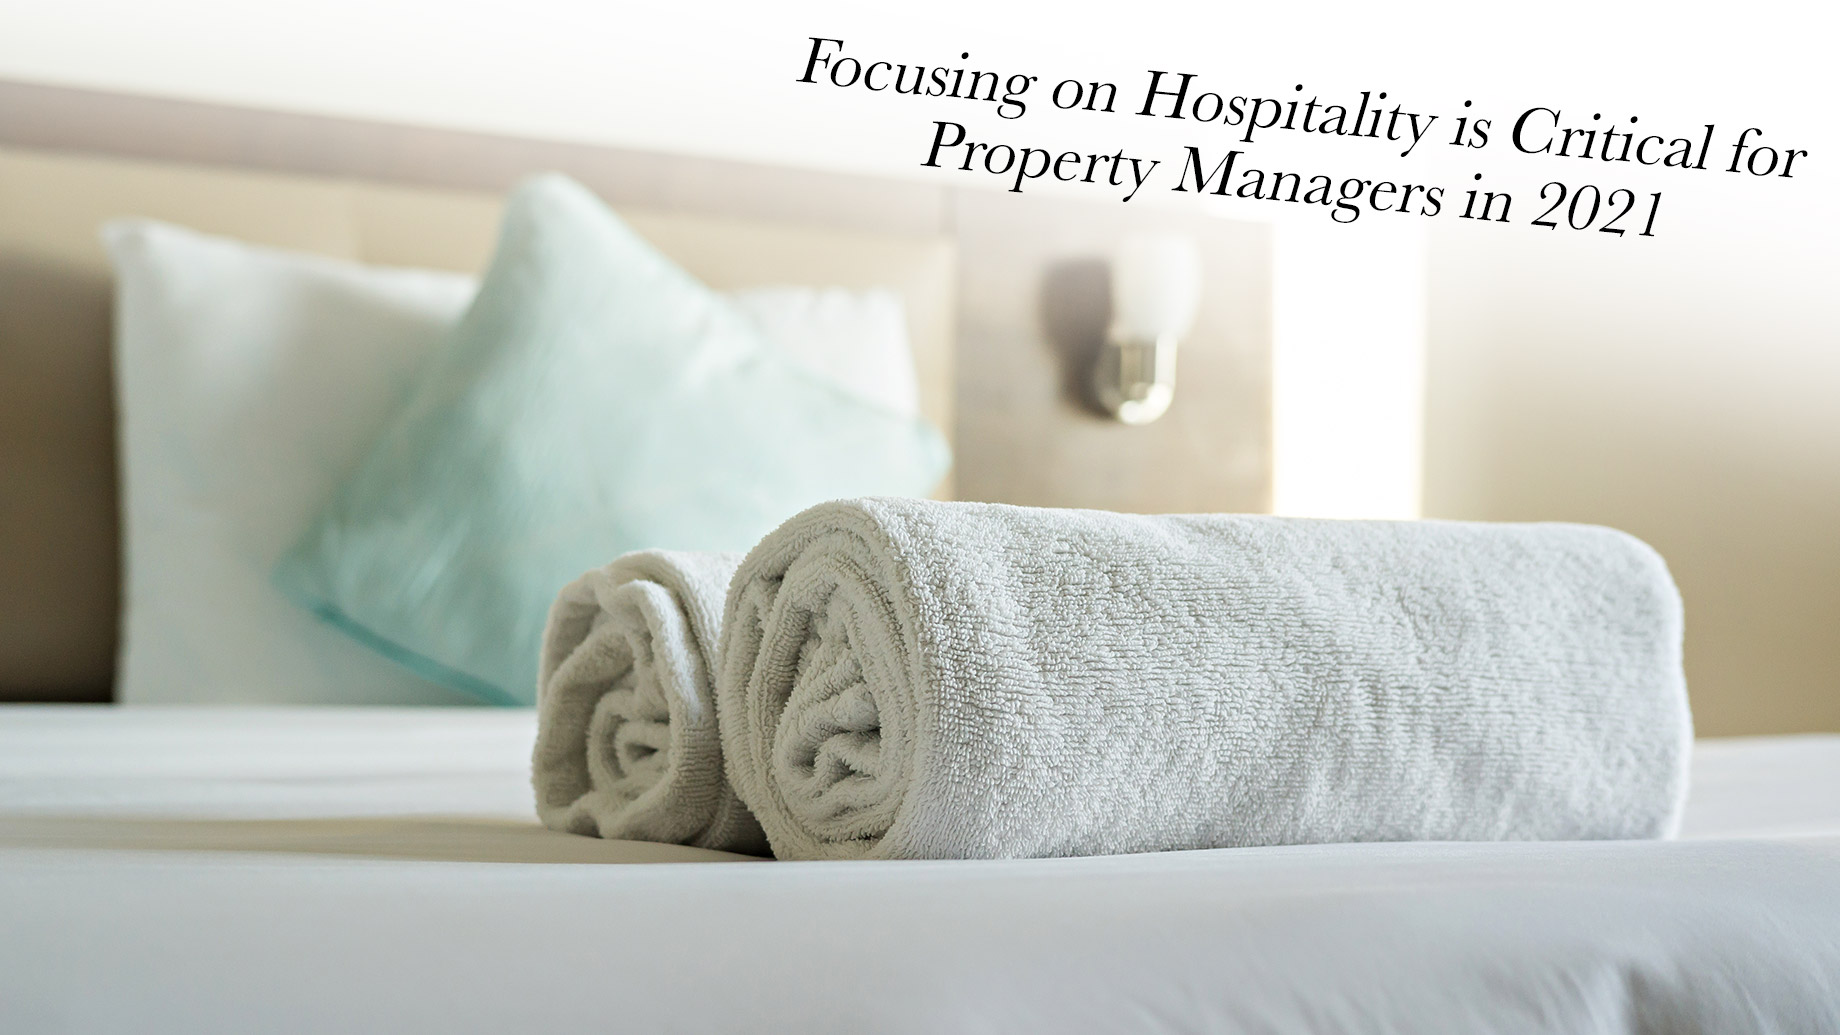 Focusing on Hospitality is Critical for Property Managers in 2021